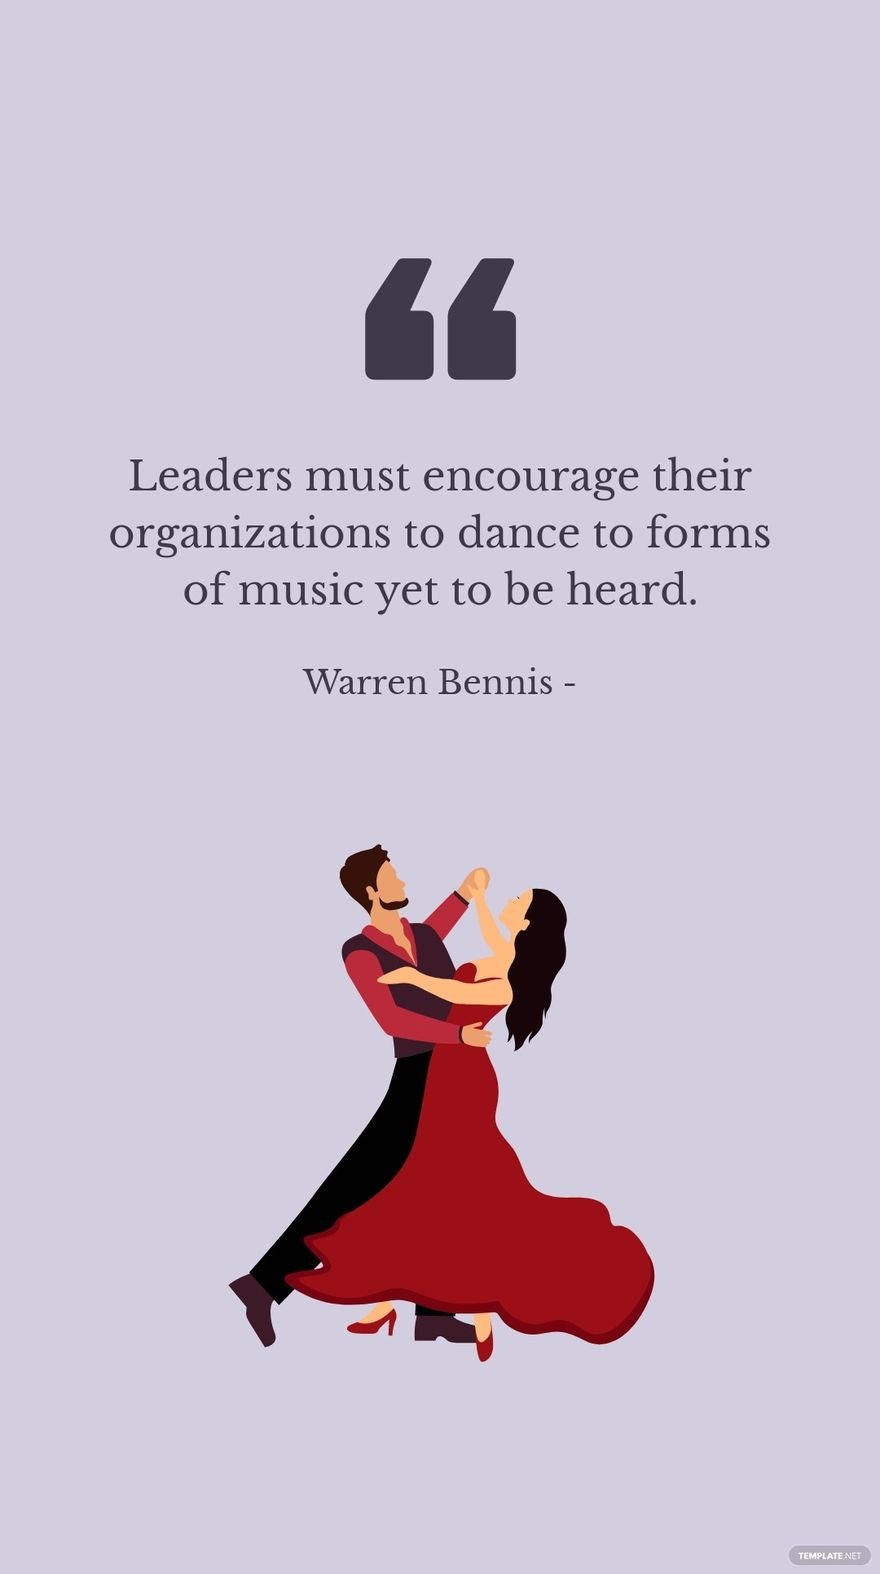 Warren Bennis - Leaders must encourage their organizations to dance to forms of music yet to be heard. in JPG